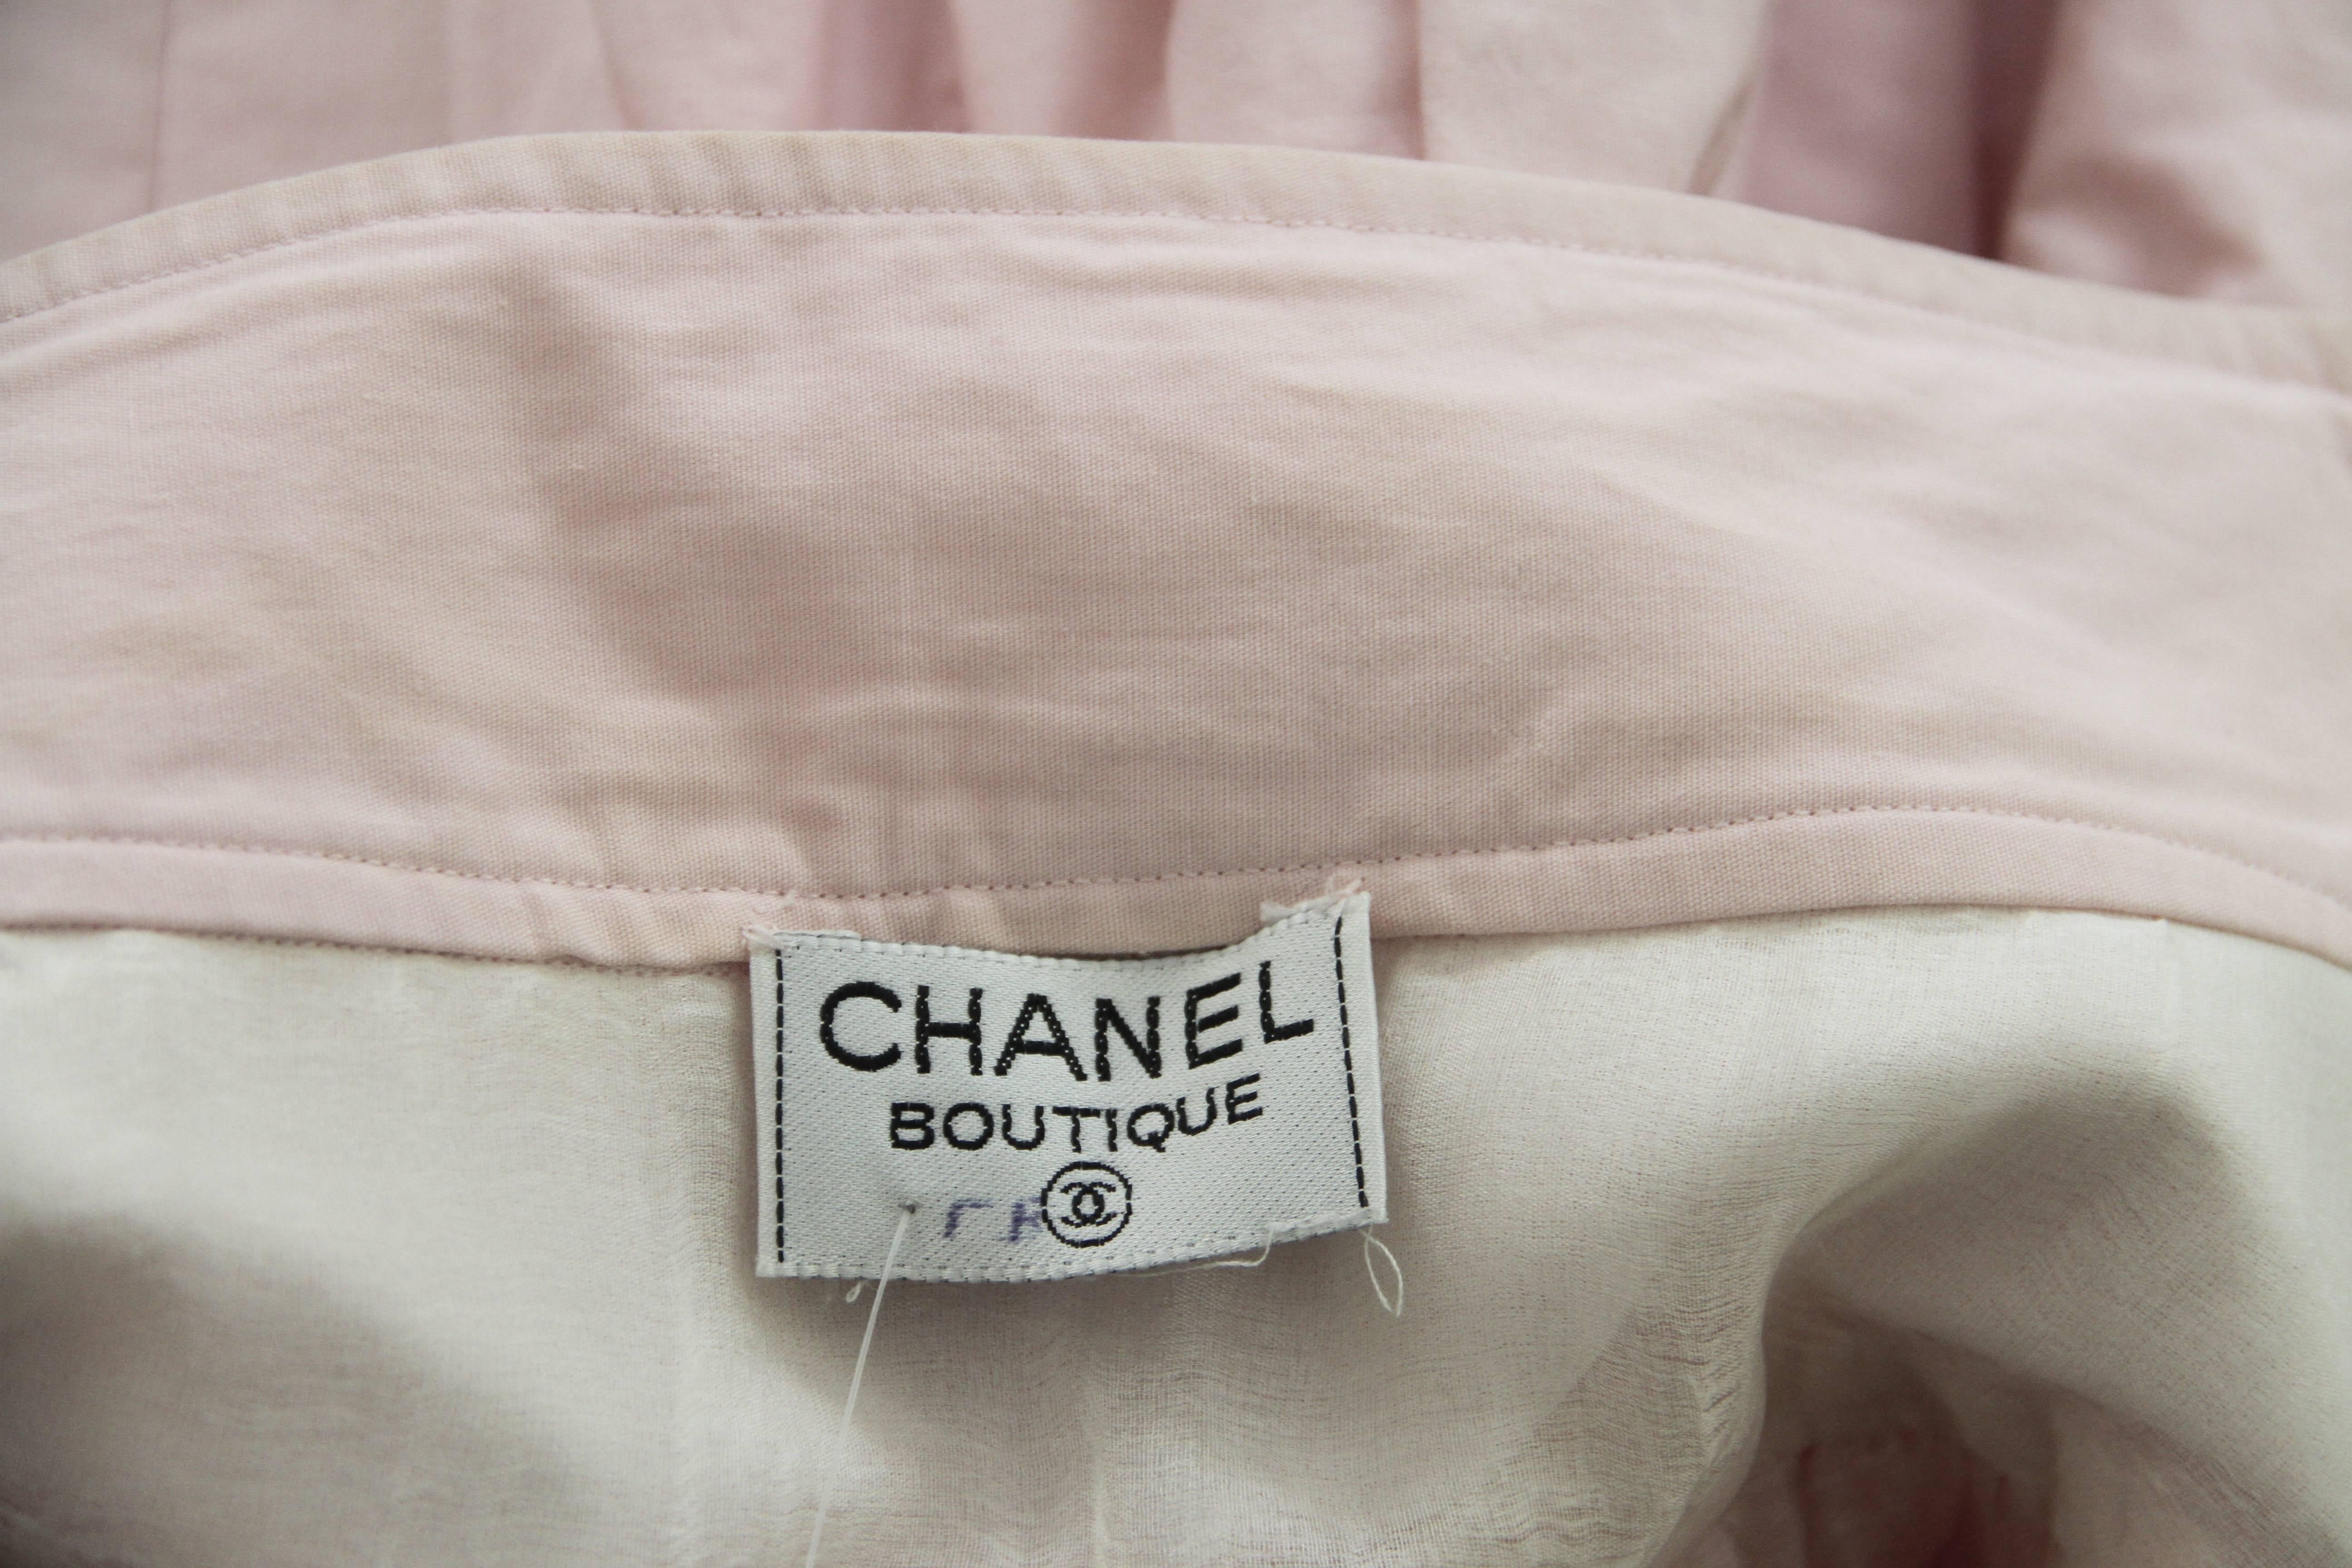 Chanel baby pink cotton tiered ruffle skirt from the late 1980's. The skirt features gold-tone metal Chanel logo buttons to each side.

Marked an French size 38.